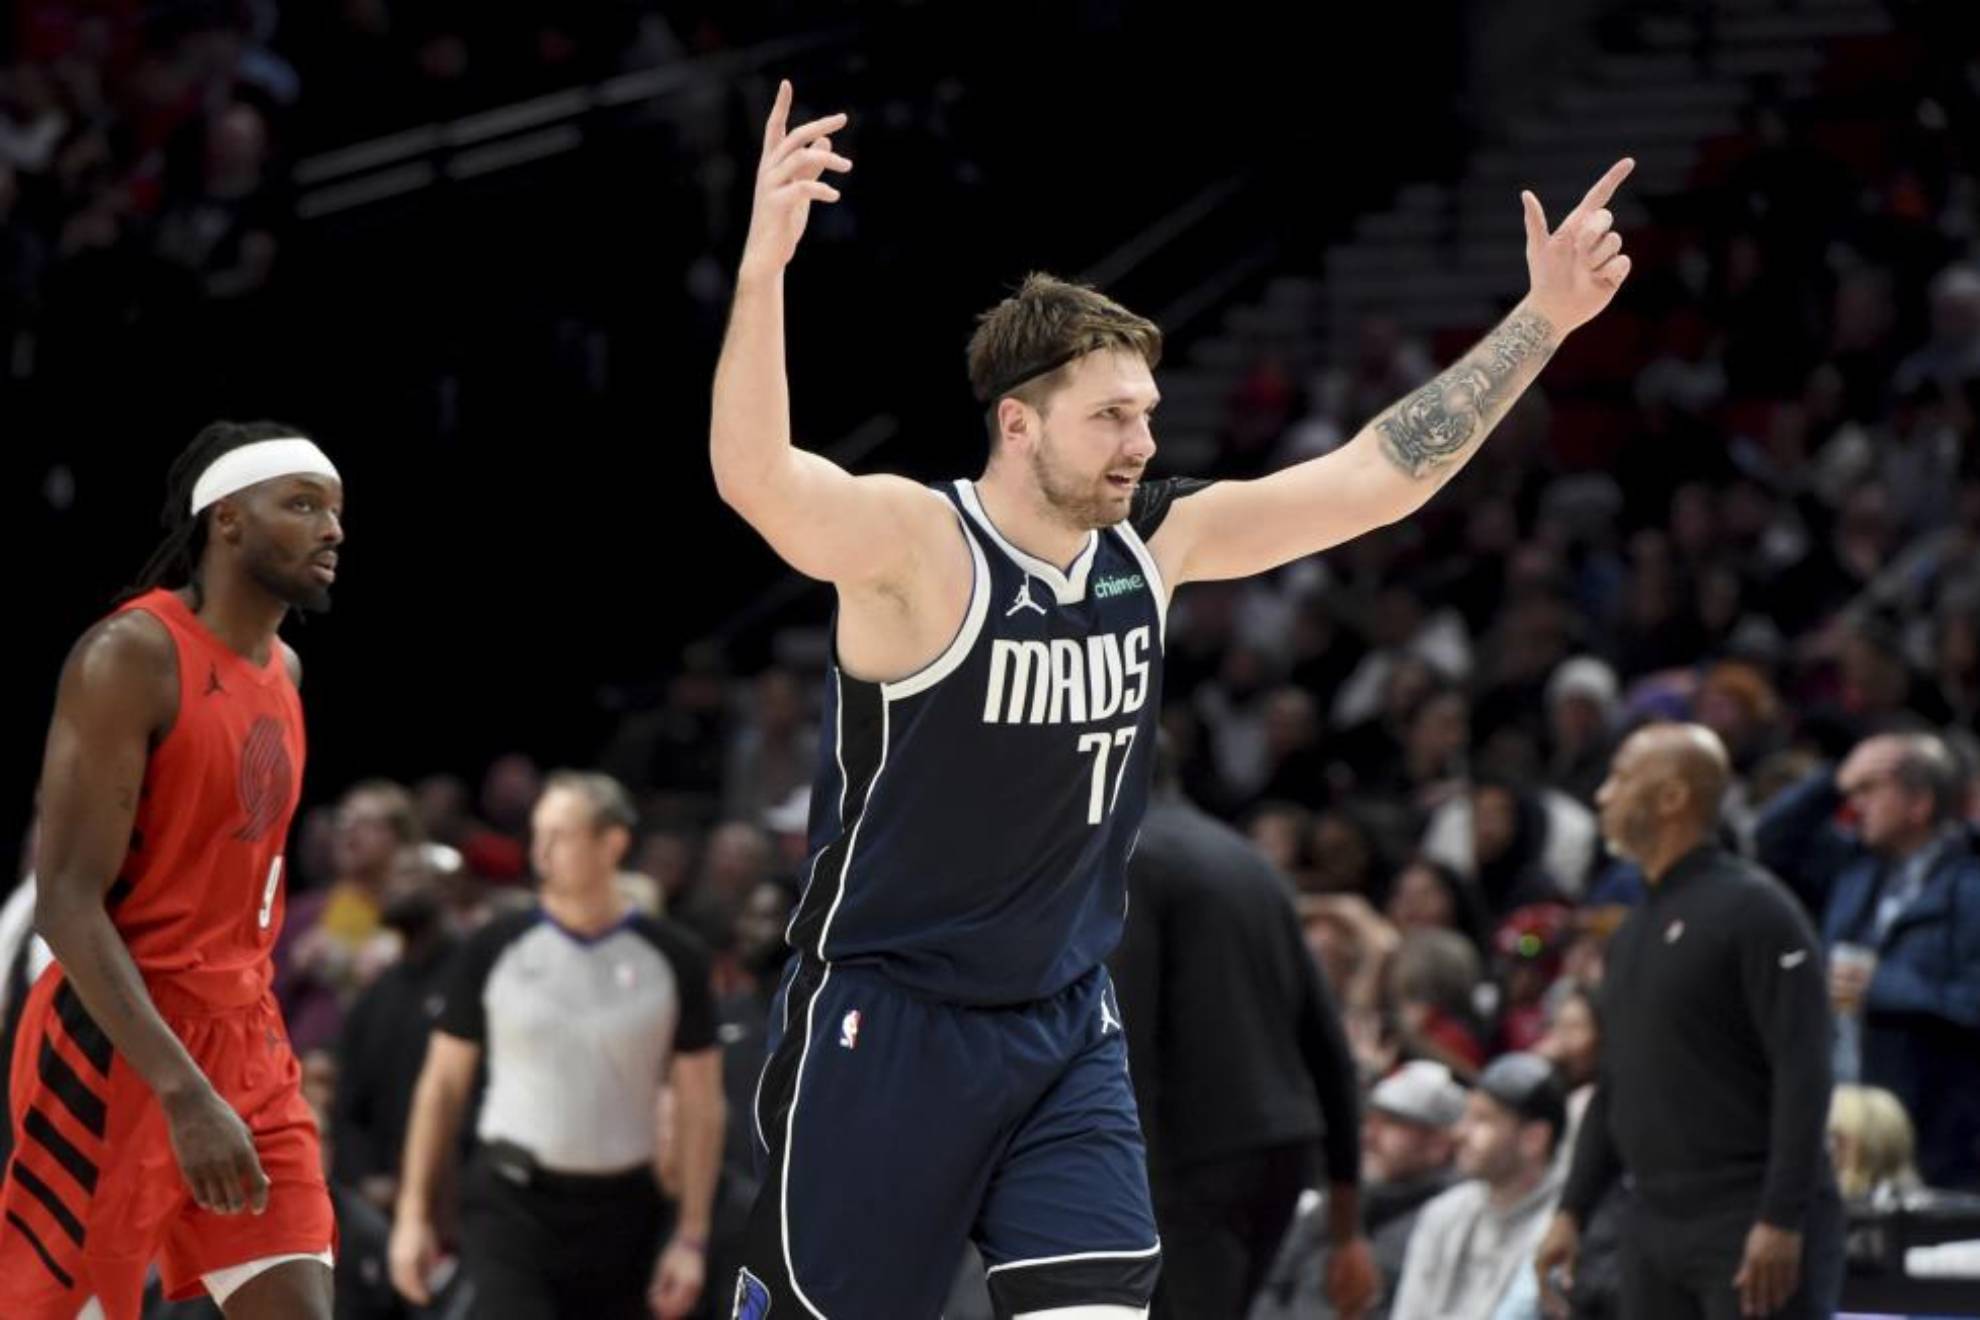 Luka Doncic celebrates one of his three-pointers against Blazers